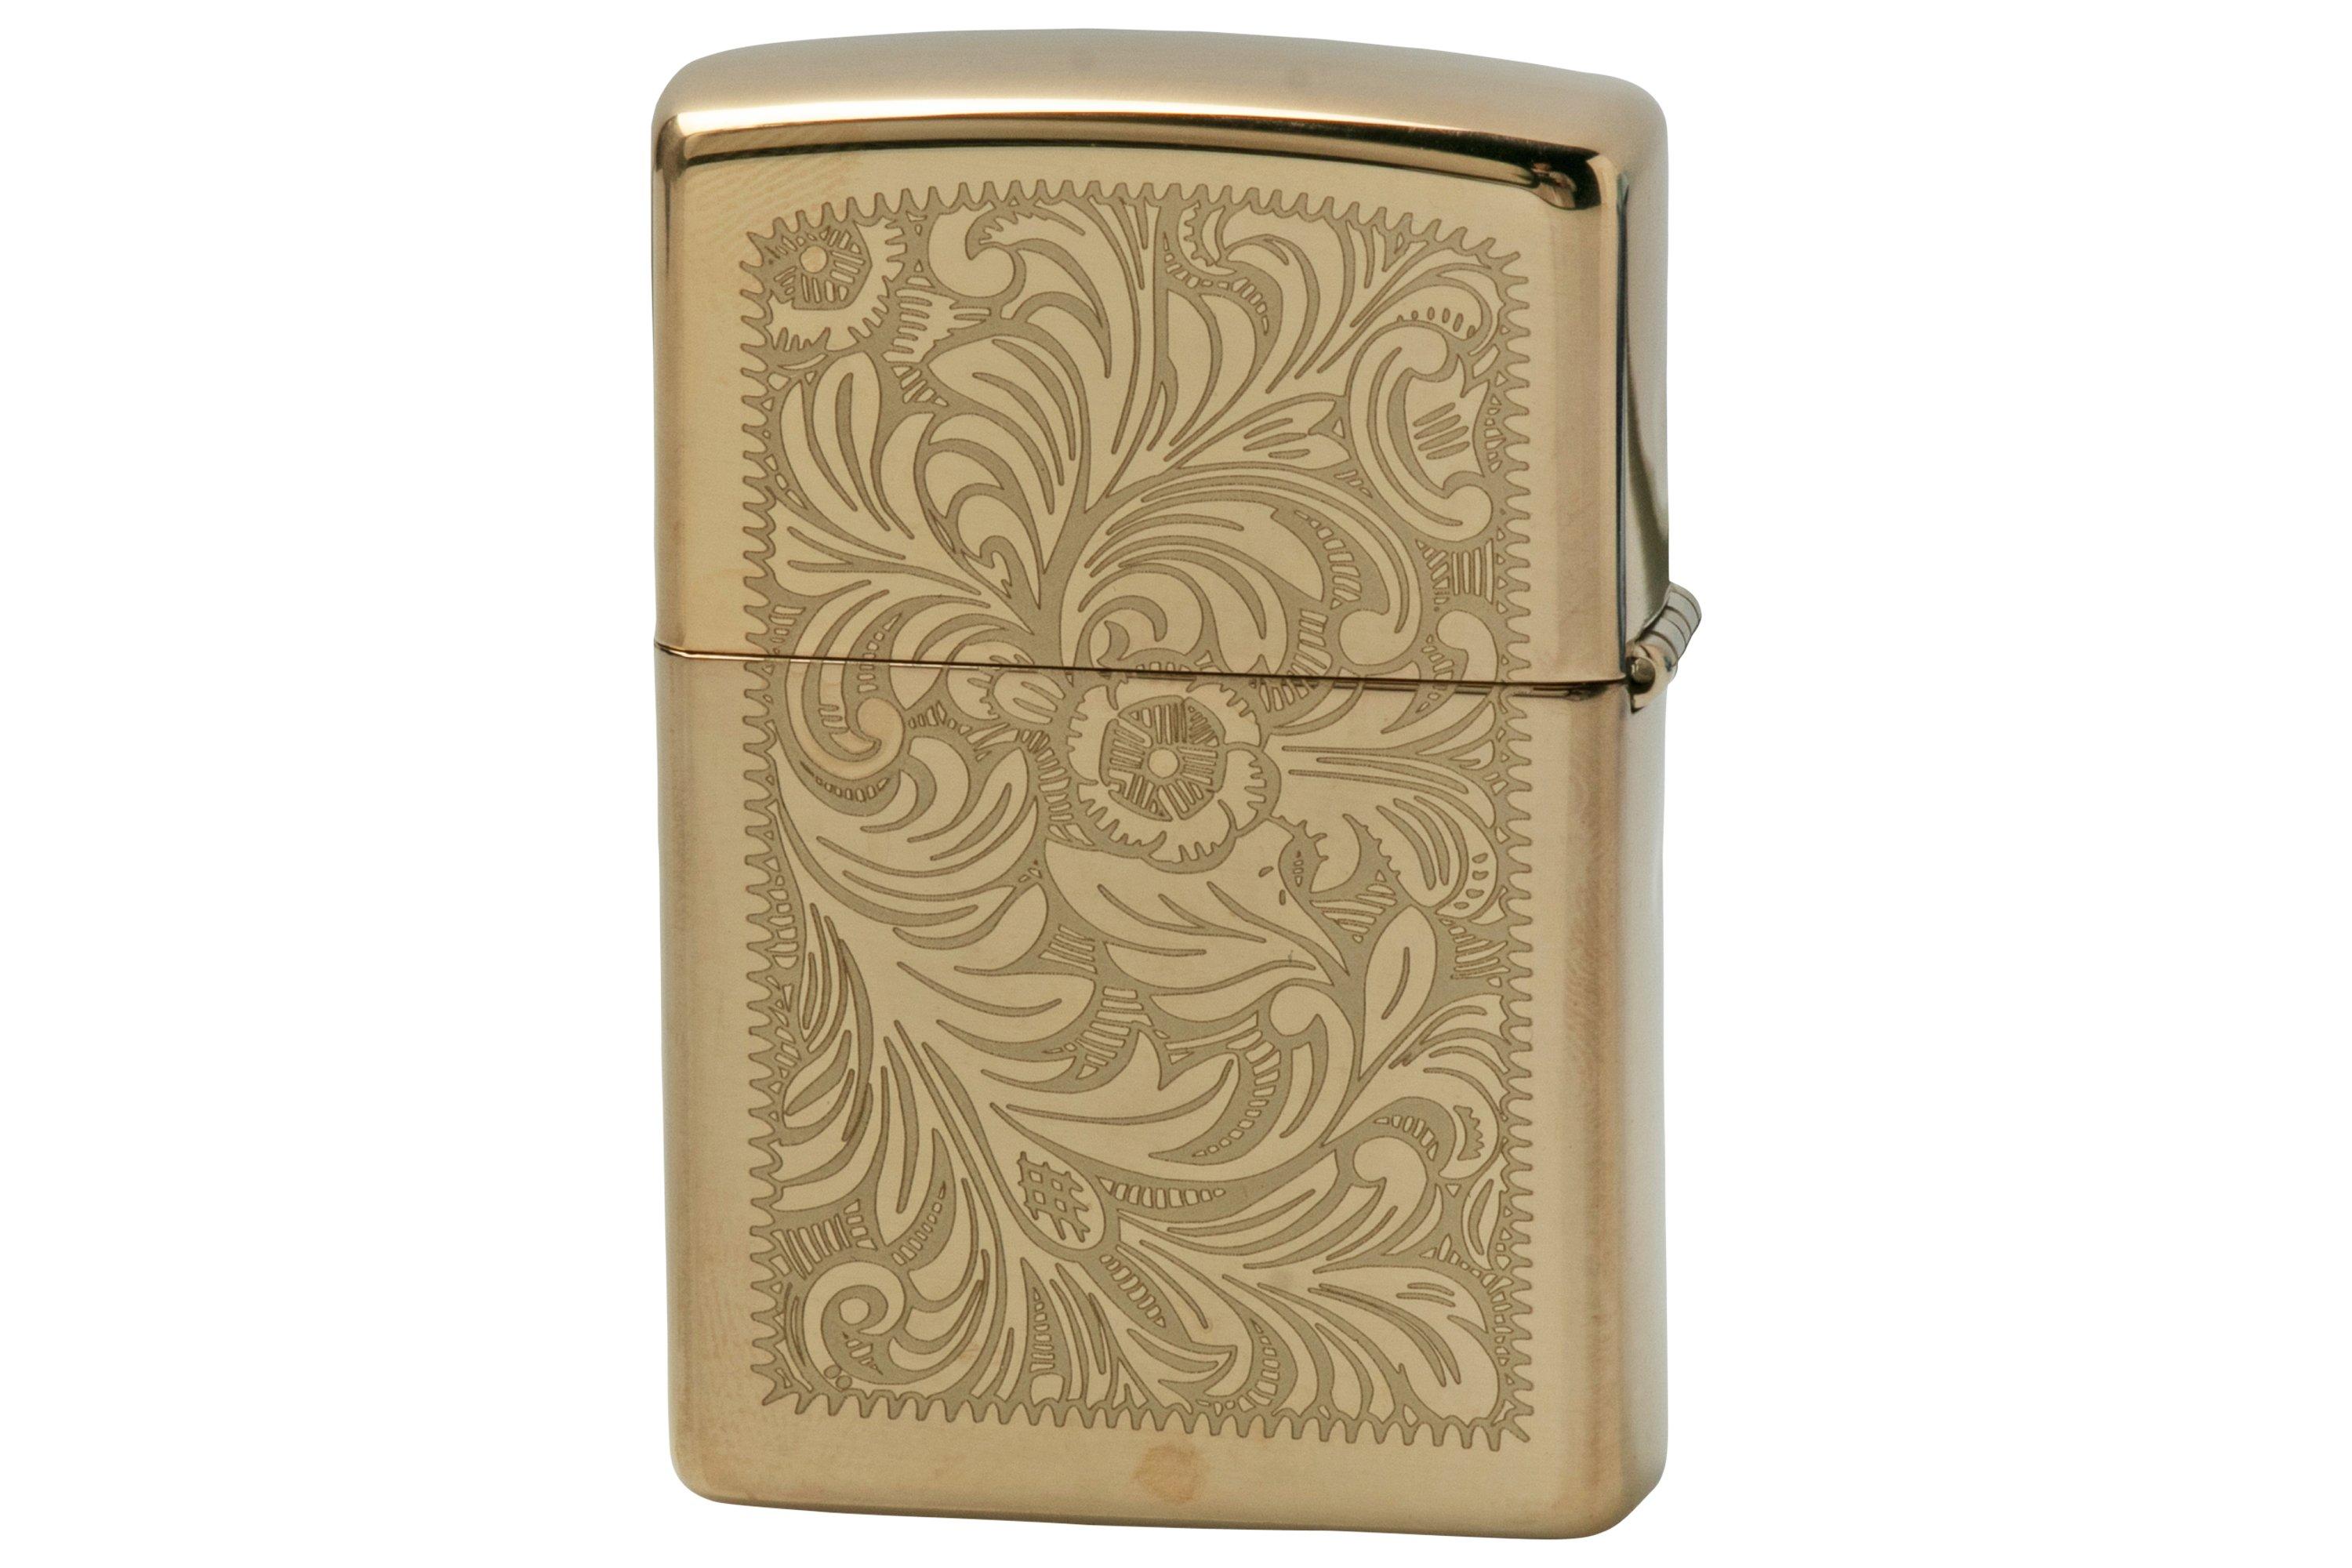 Zippo Classic Armor 162-000003, Brushed Chrome, lighter | Advantageously shopping at ...